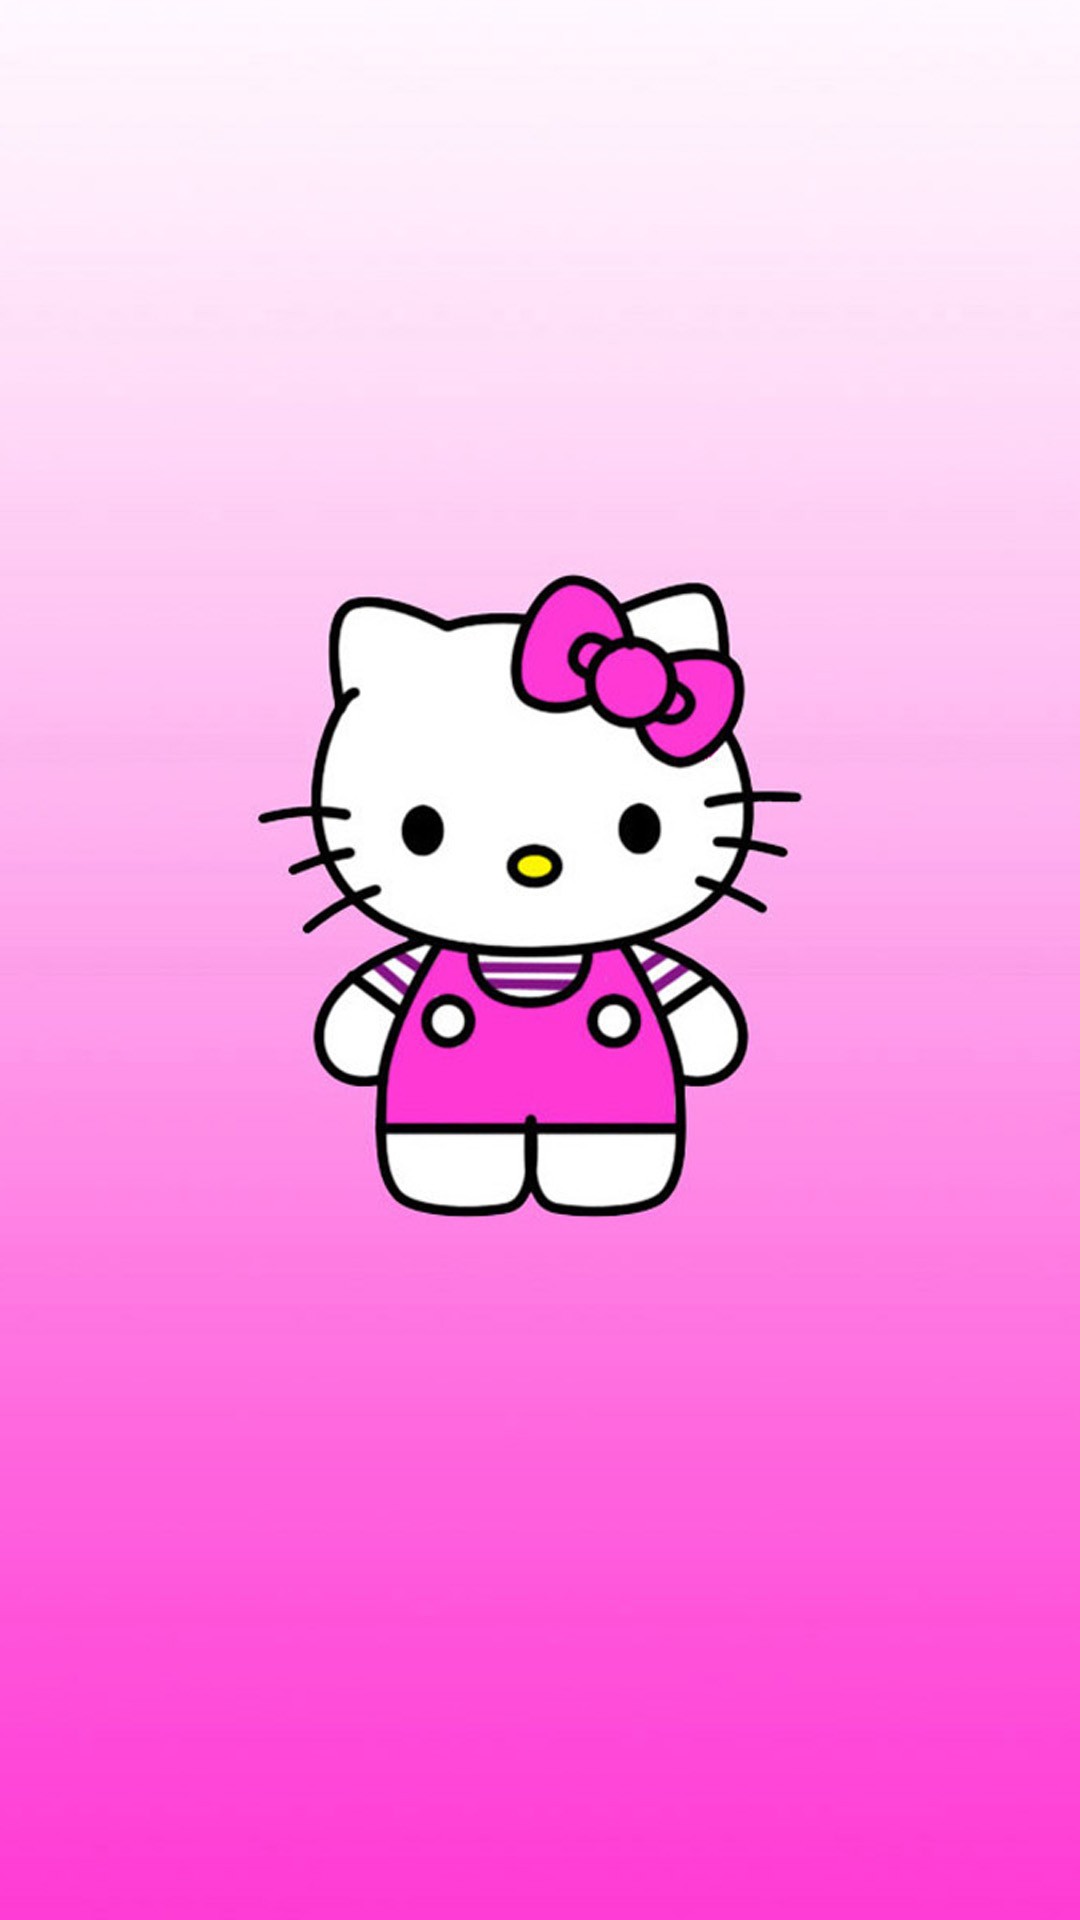 Sanrio Hello Kitty Wallpaper Android With Image Resolution - Hình Nền Hello Kitty - HD Wallpaper 